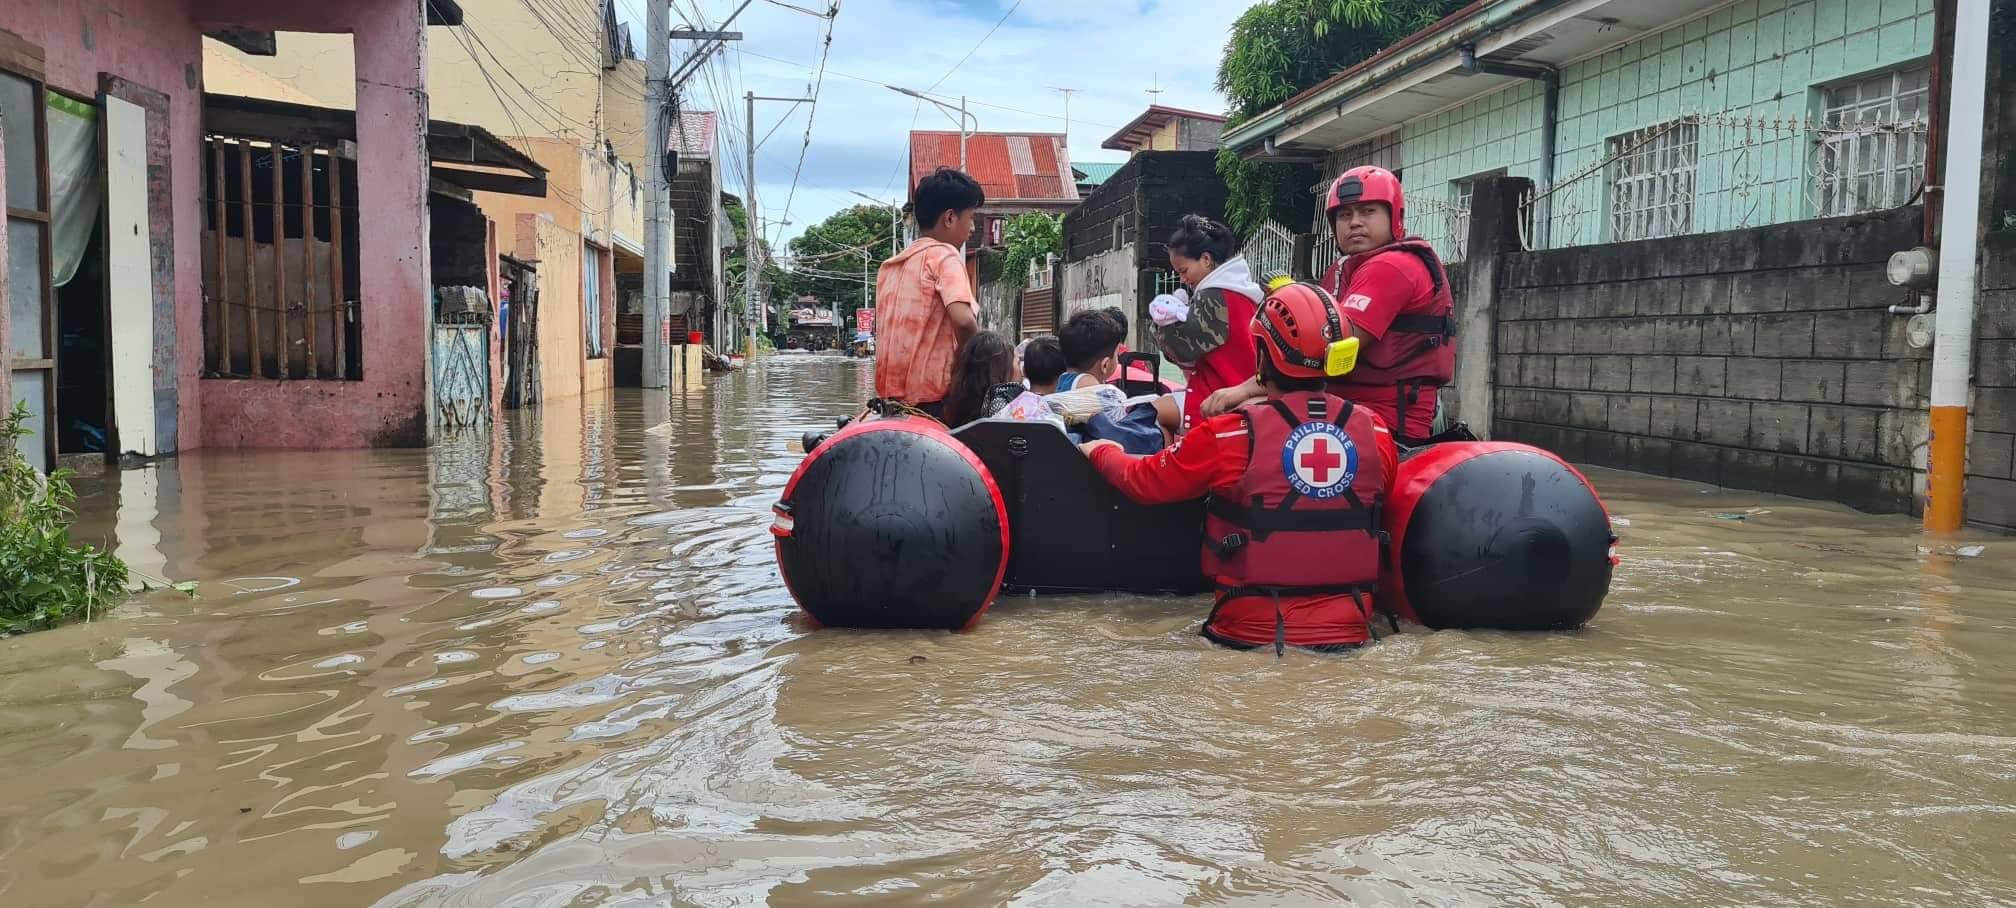 rescuers rescuing people in a float on flood